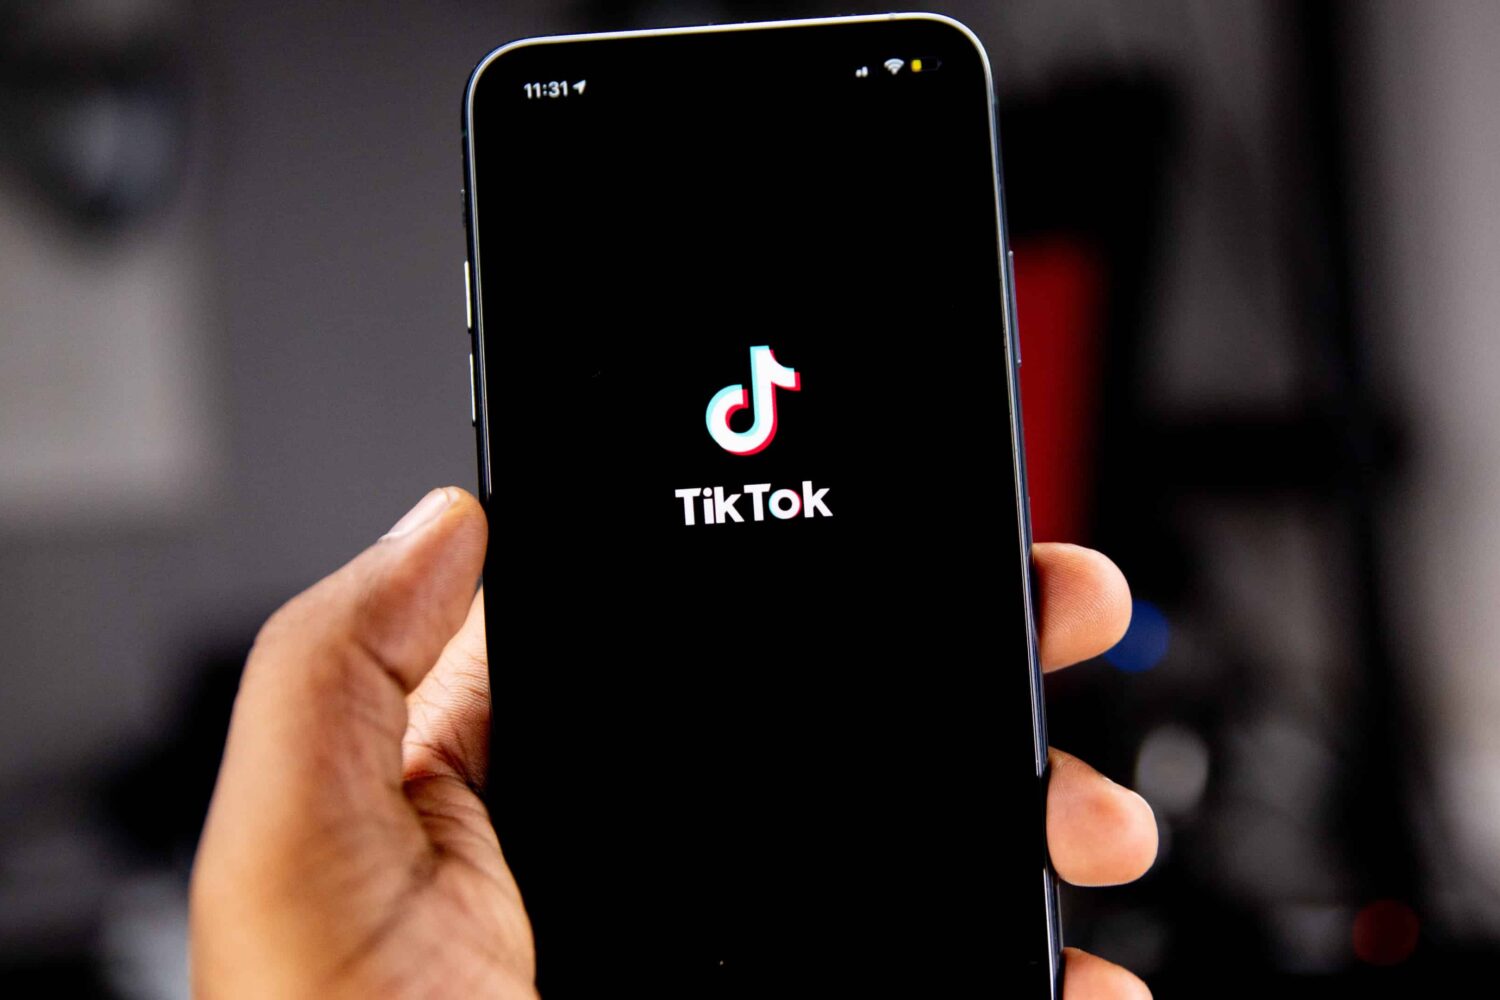 iPhone in hand showing launching the TikTok app